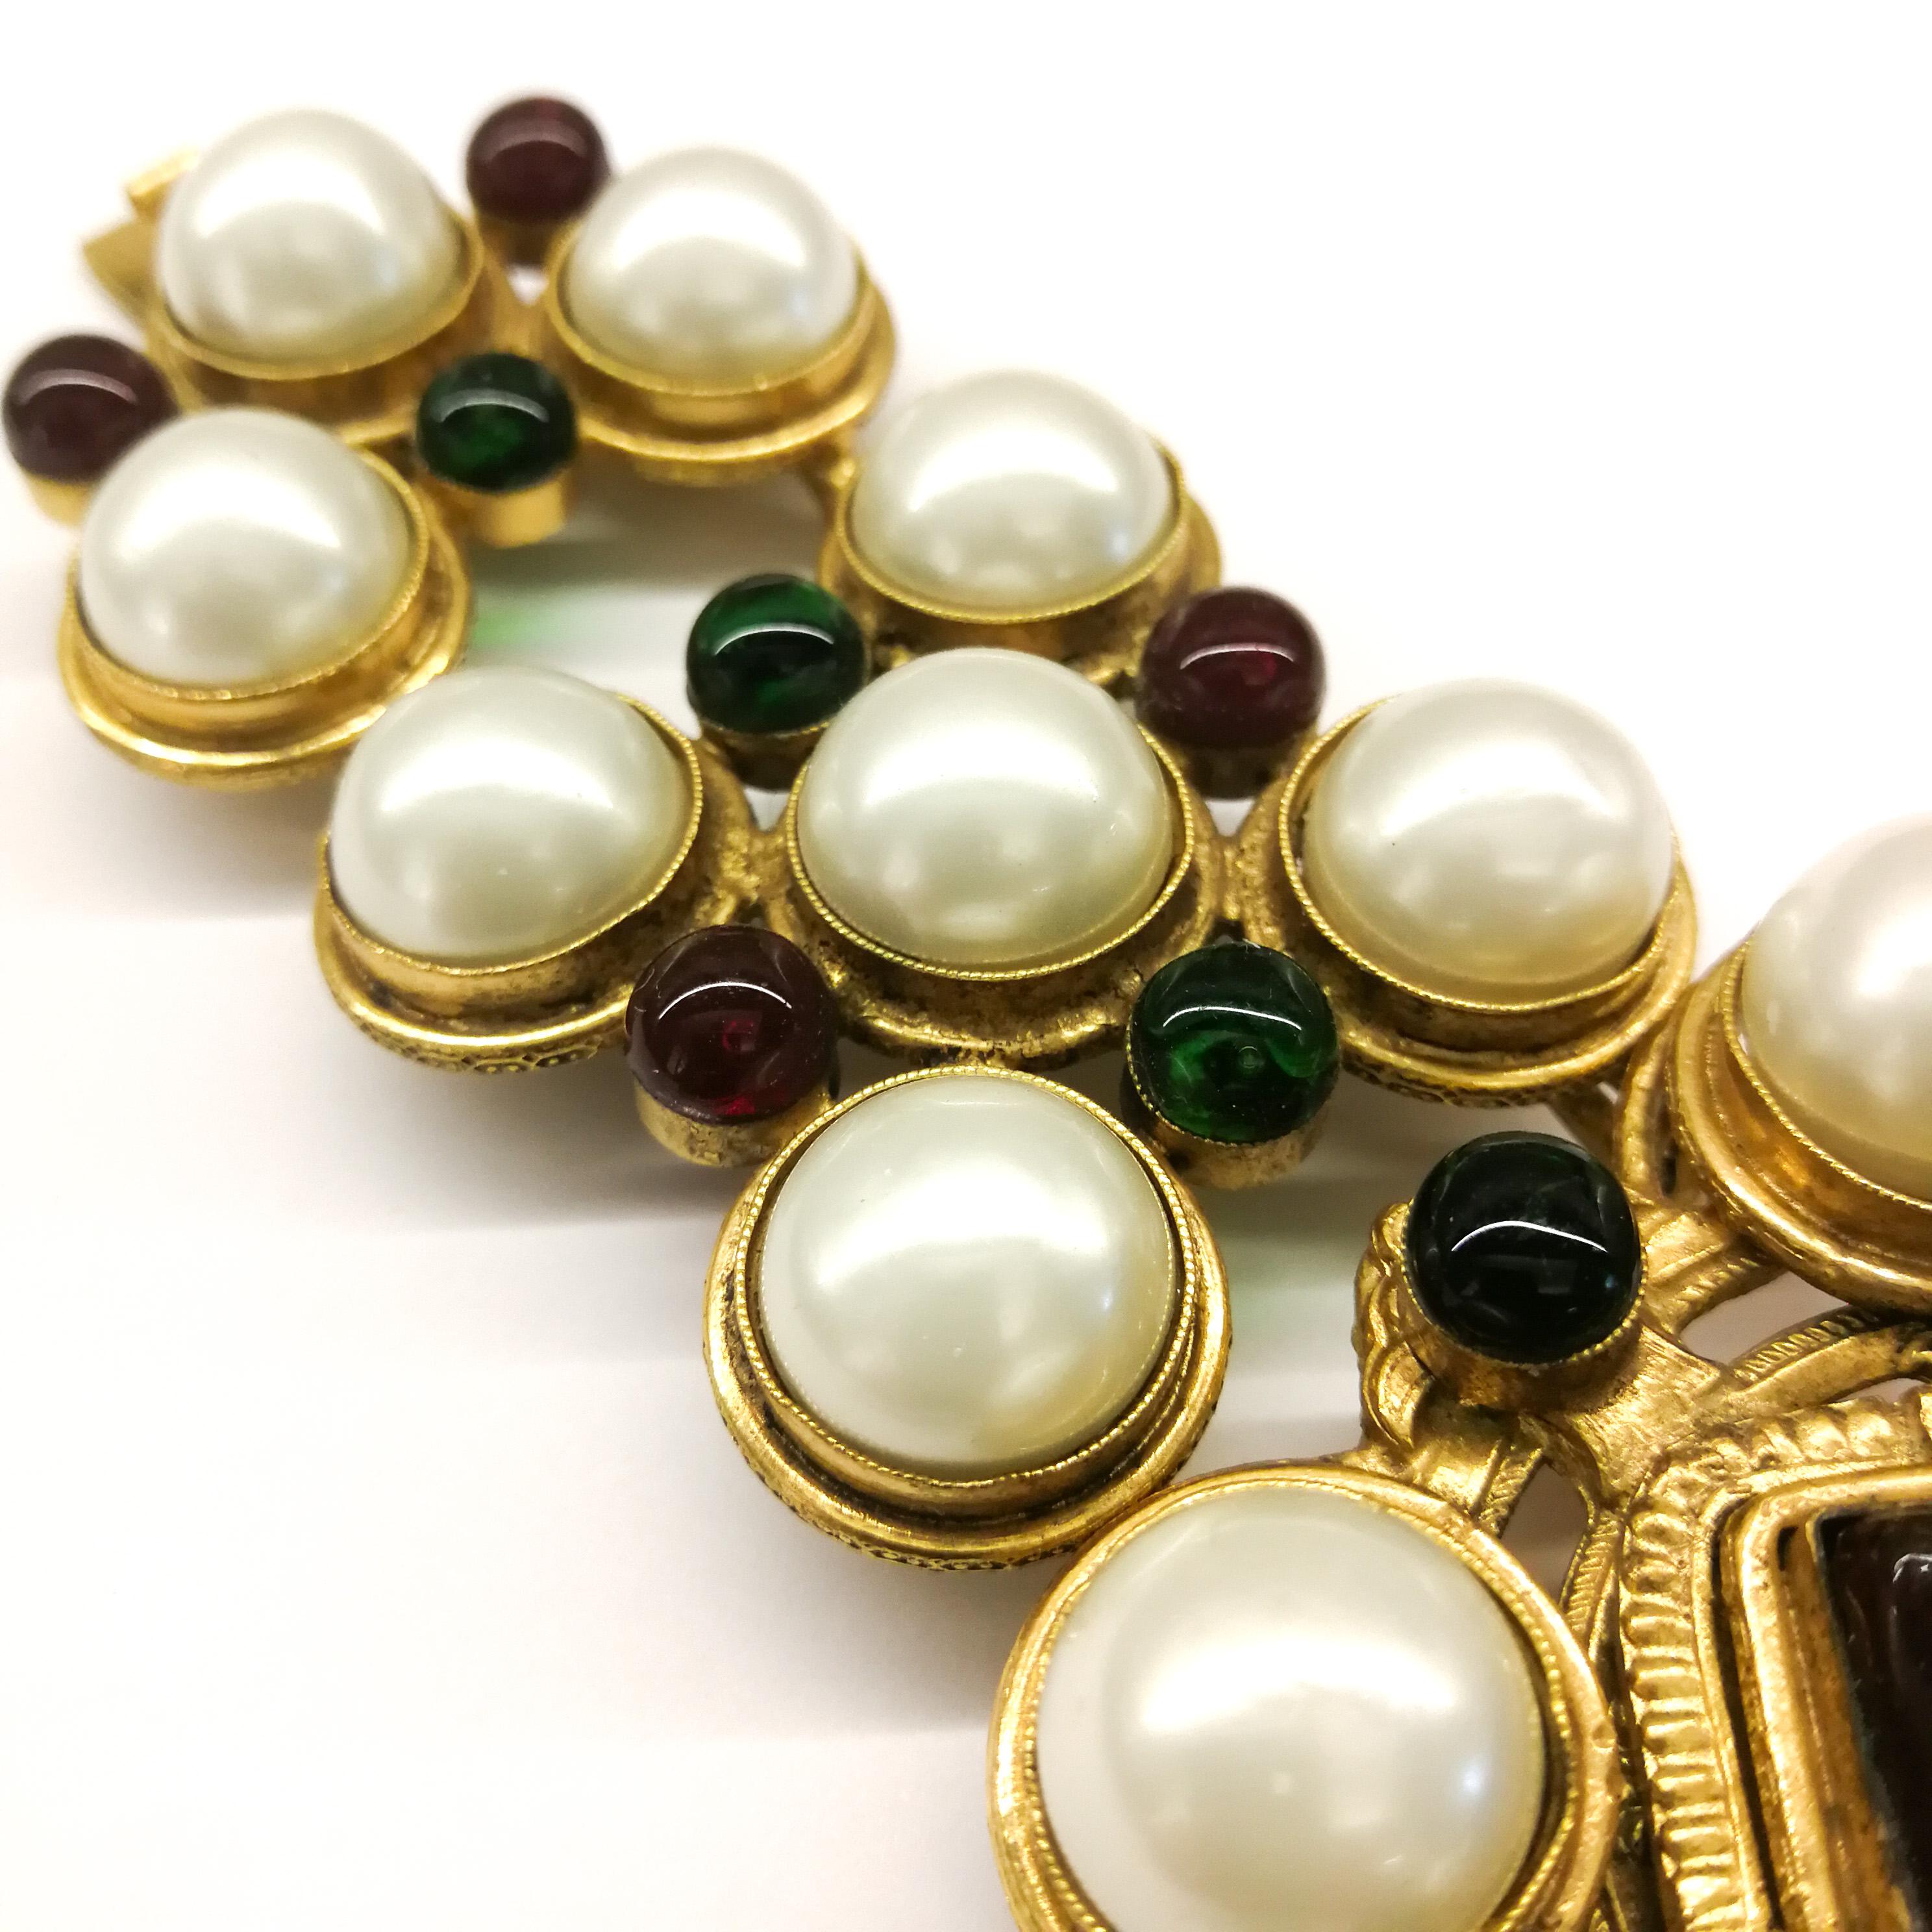 A very strong and dazzling wide bracelet by Maison Goossens for Chanel, set with lush pearl cabuchons and emerald and ruby poured glass, with a large square ruby/cornelian  poured glass square in the centre, all set in gilded metal. It is